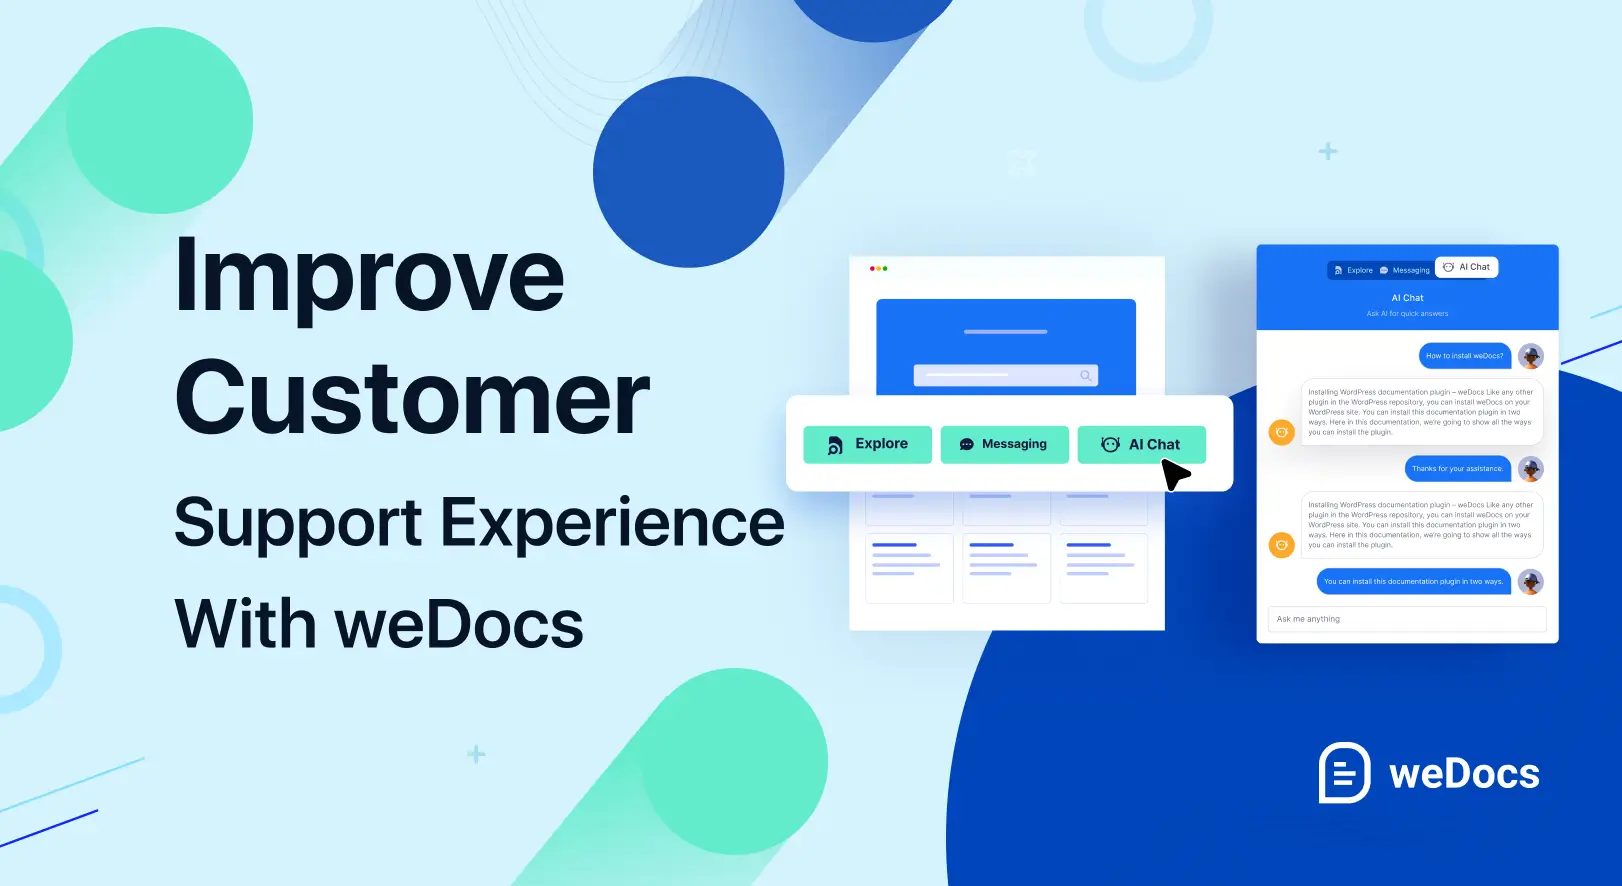 How To Improve Customer Support Experience With Wedocs